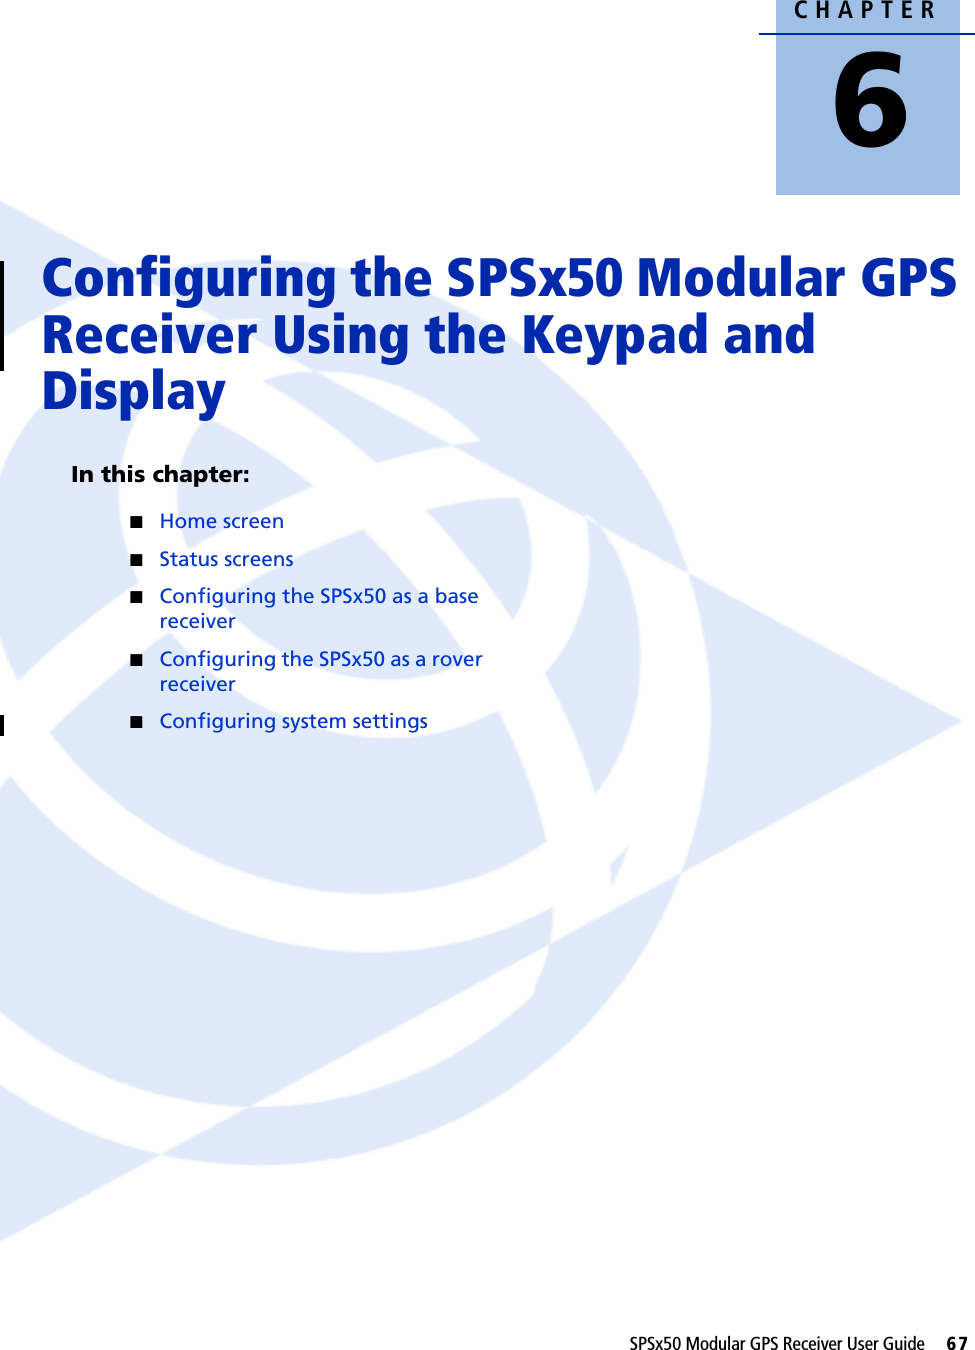 CHAPTER6SPSx50 Modular GPS Receiver User Guide     67Configuring the SPSx50 Modular GPS Receiver Using the Keypad and Display 6In this chapter:QHome screenQStatus screensQConfiguring the SPSx50 as a base receiverQConfiguring the SPSx50 as a rover receiverQConfiguring system settings